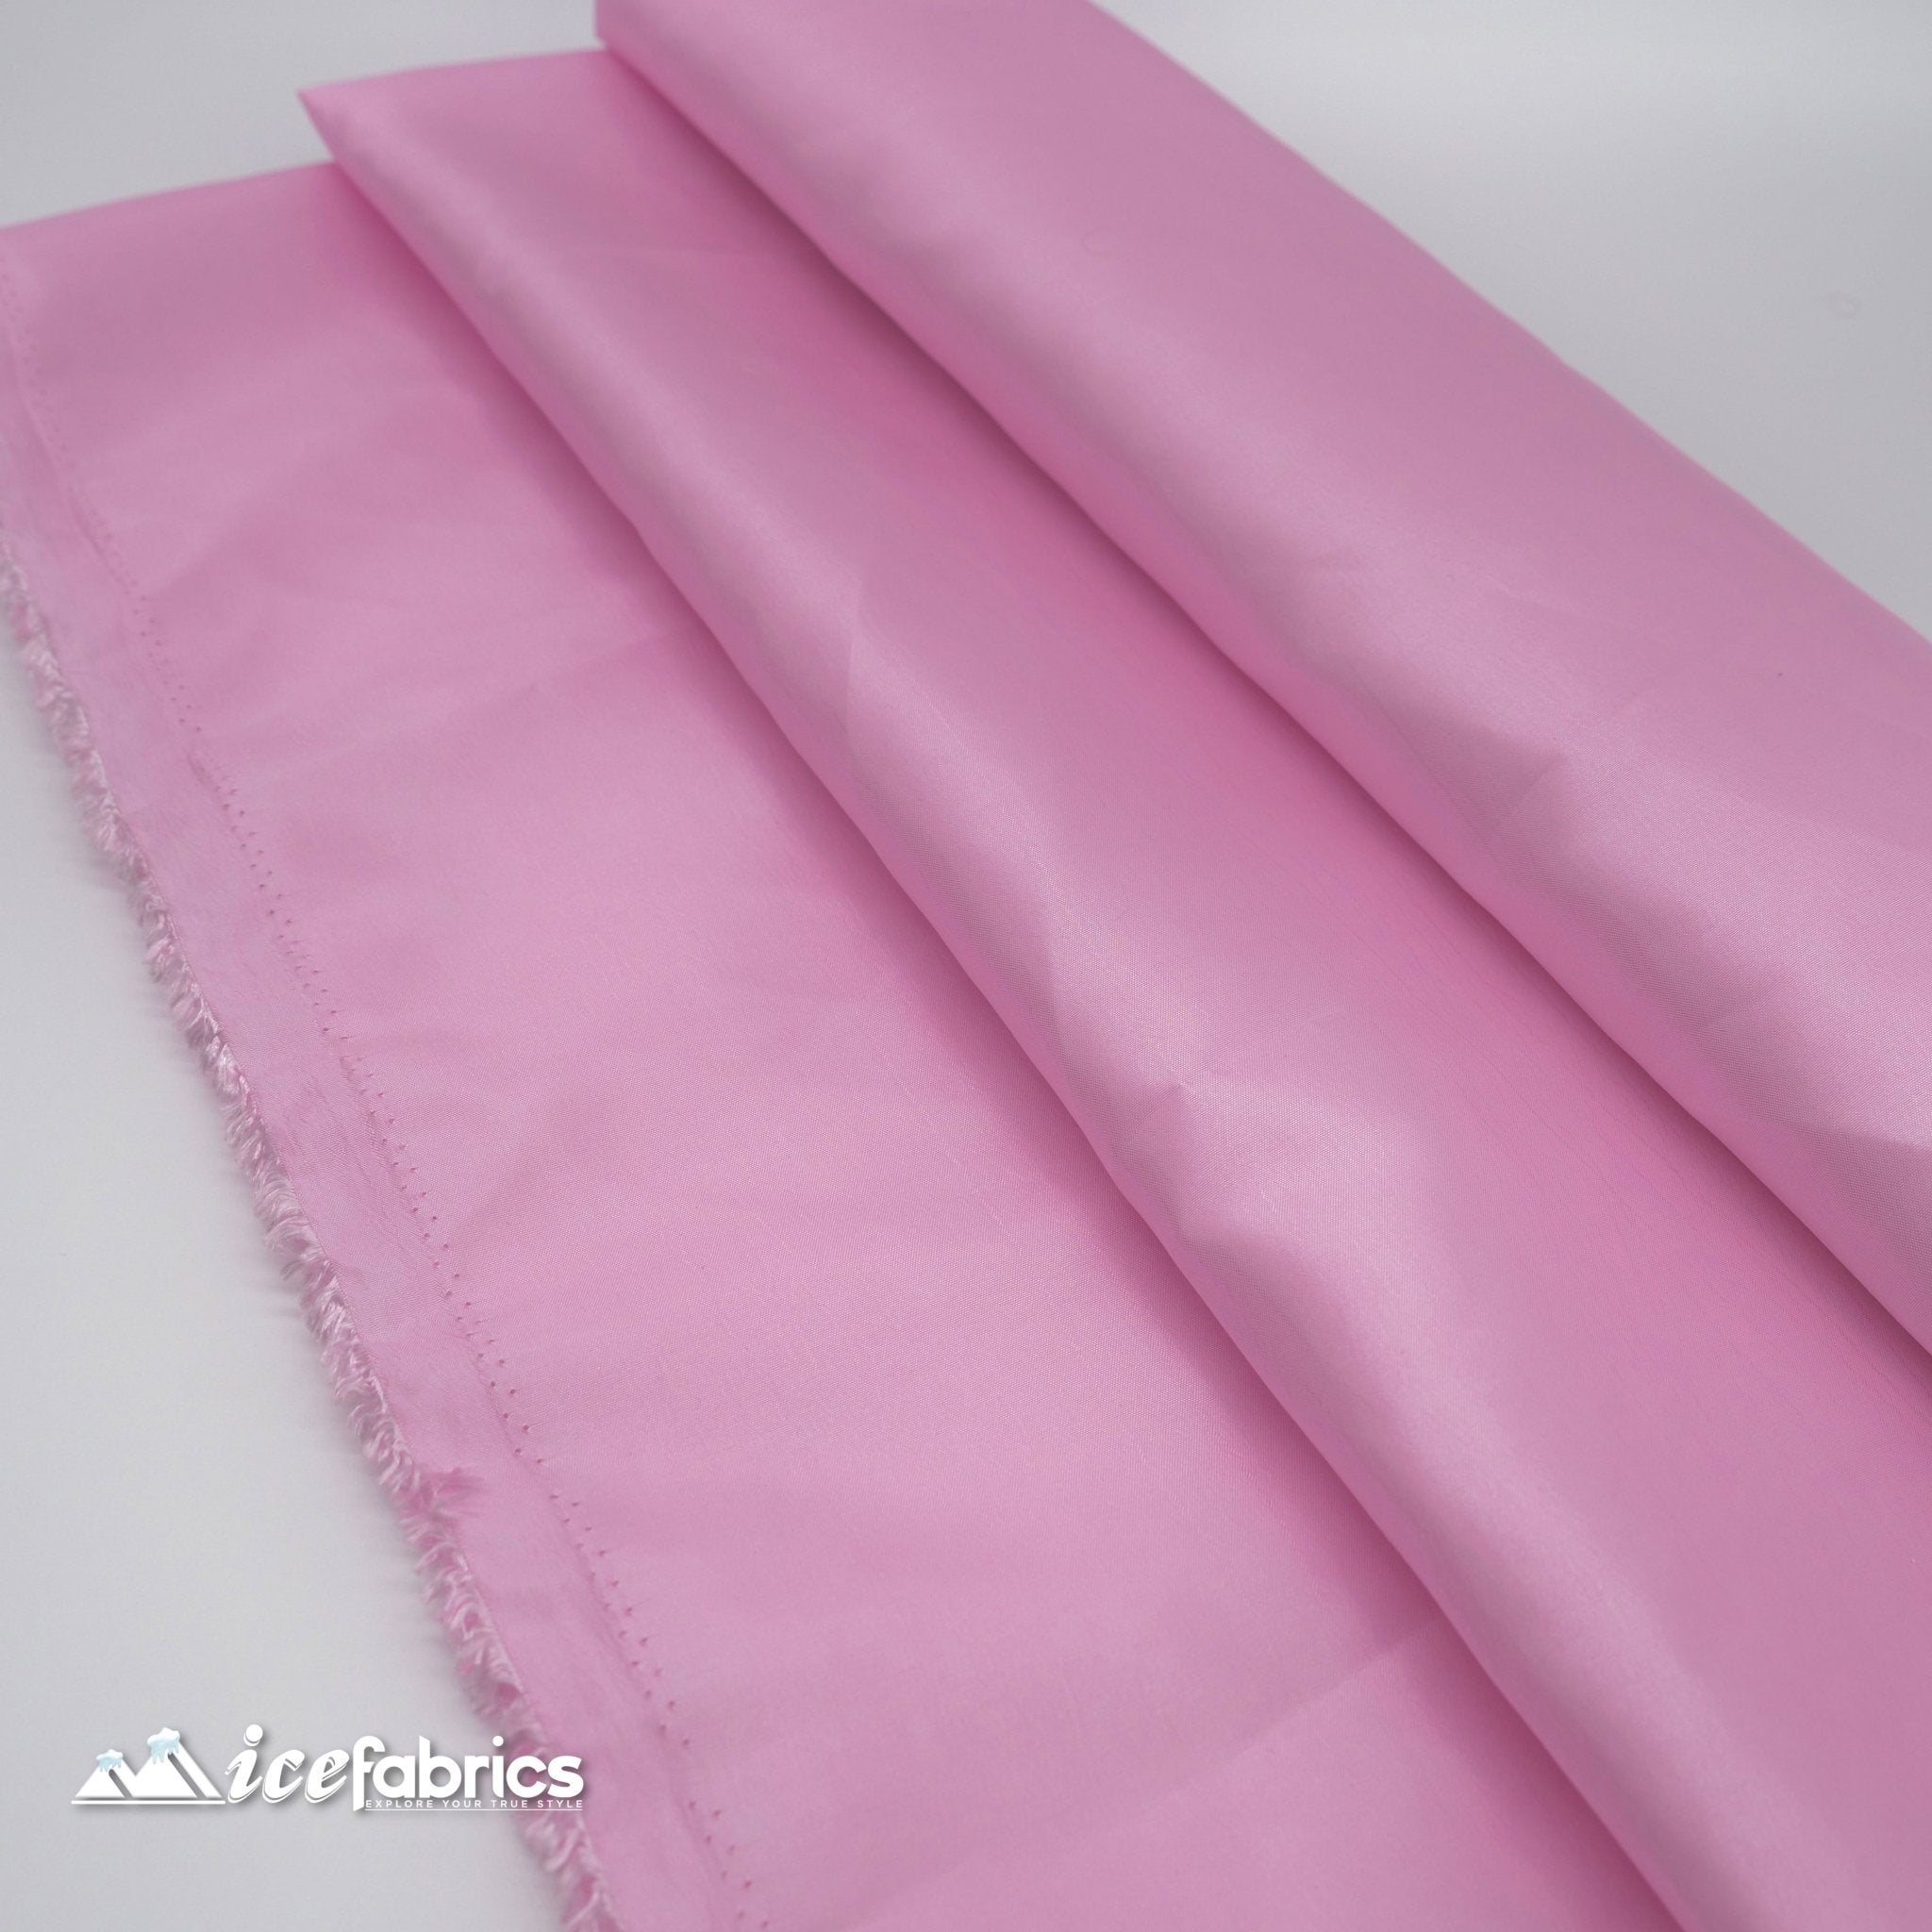 High Quality Solid Taffeta Fabric_ 60" Width_ By The YardTaffeta FabricICEFABRICICE FABRICSWhiteHigh Quality Solid Taffeta Fabric_ 60" Width_ By The YardTaffeta FabricICEFABRICICE FABRICSChampagneHigh Quality Solid Taffeta Fabric_ 60" Width_ By The Yard ICEFABRIC Pink